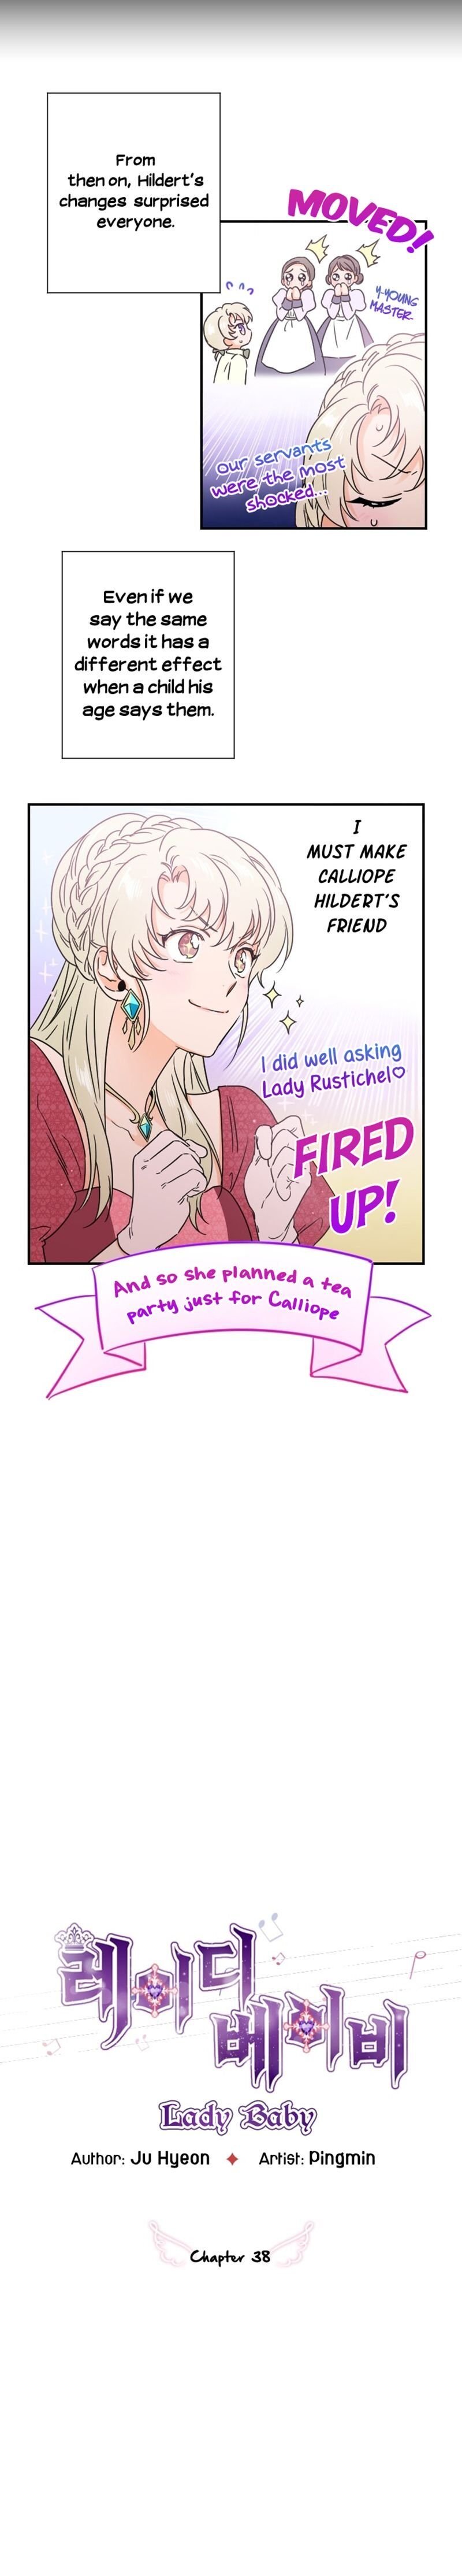 Lady Baby Chapter 38 - Page 3